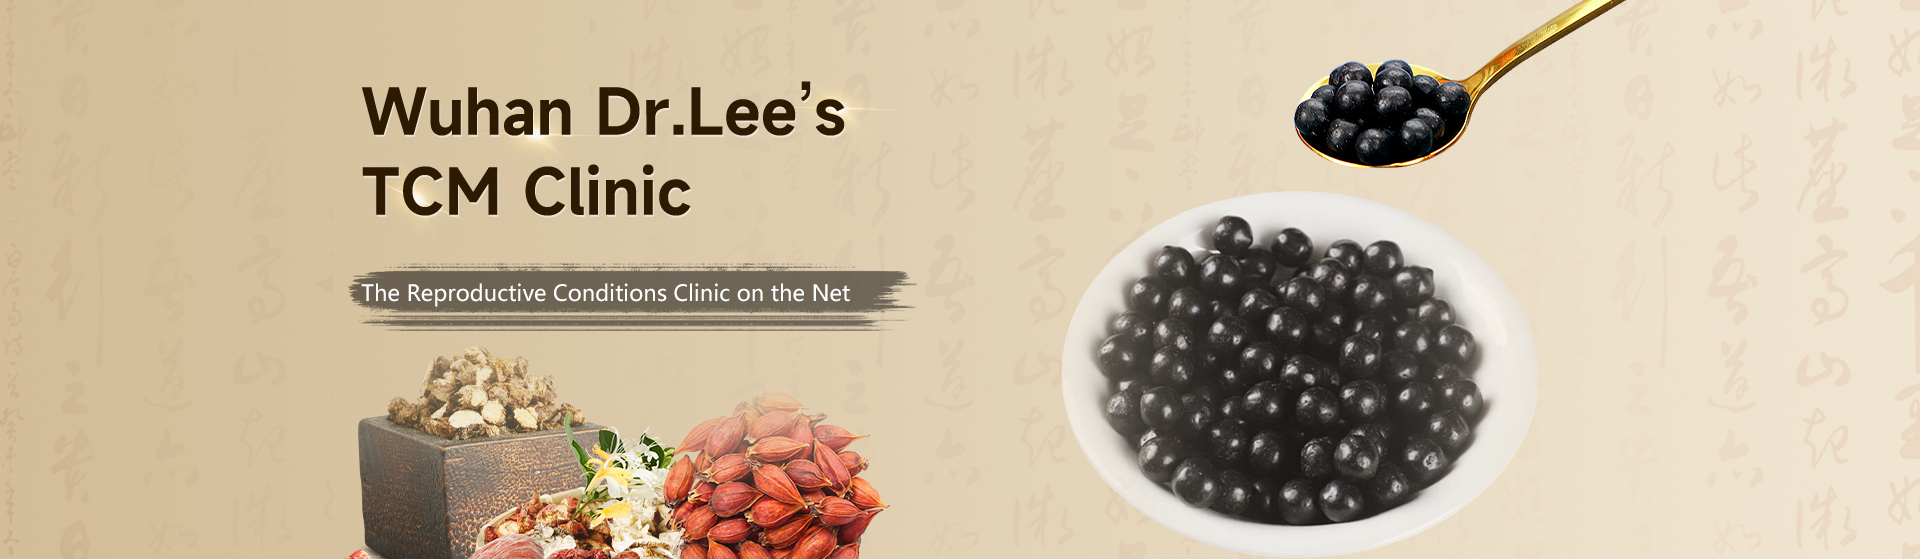 Wuhan Dr.Lee's TCM Clinic'